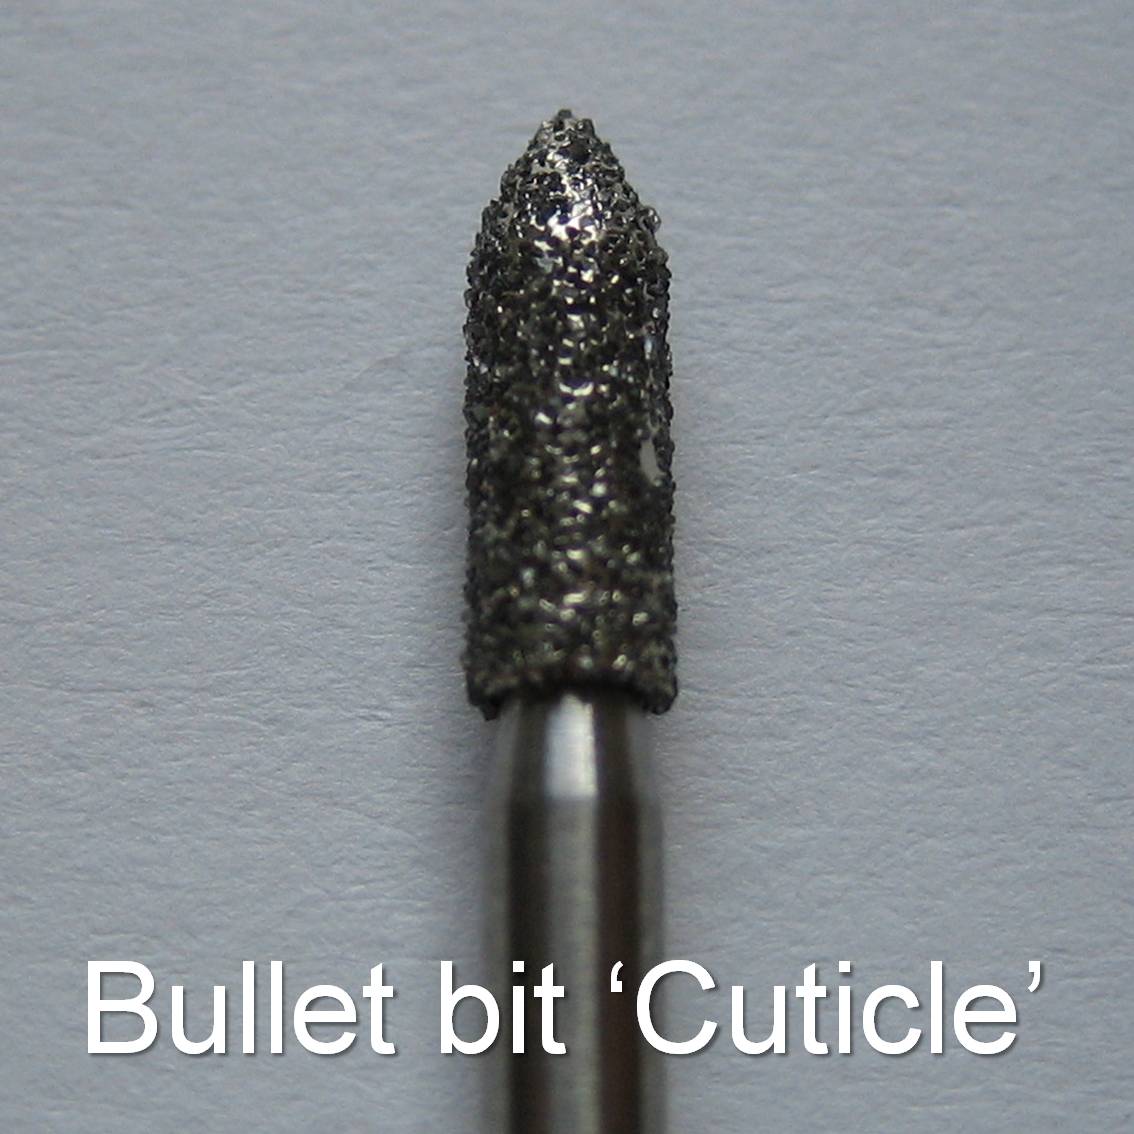 Atwood Bullet bit Cuticle